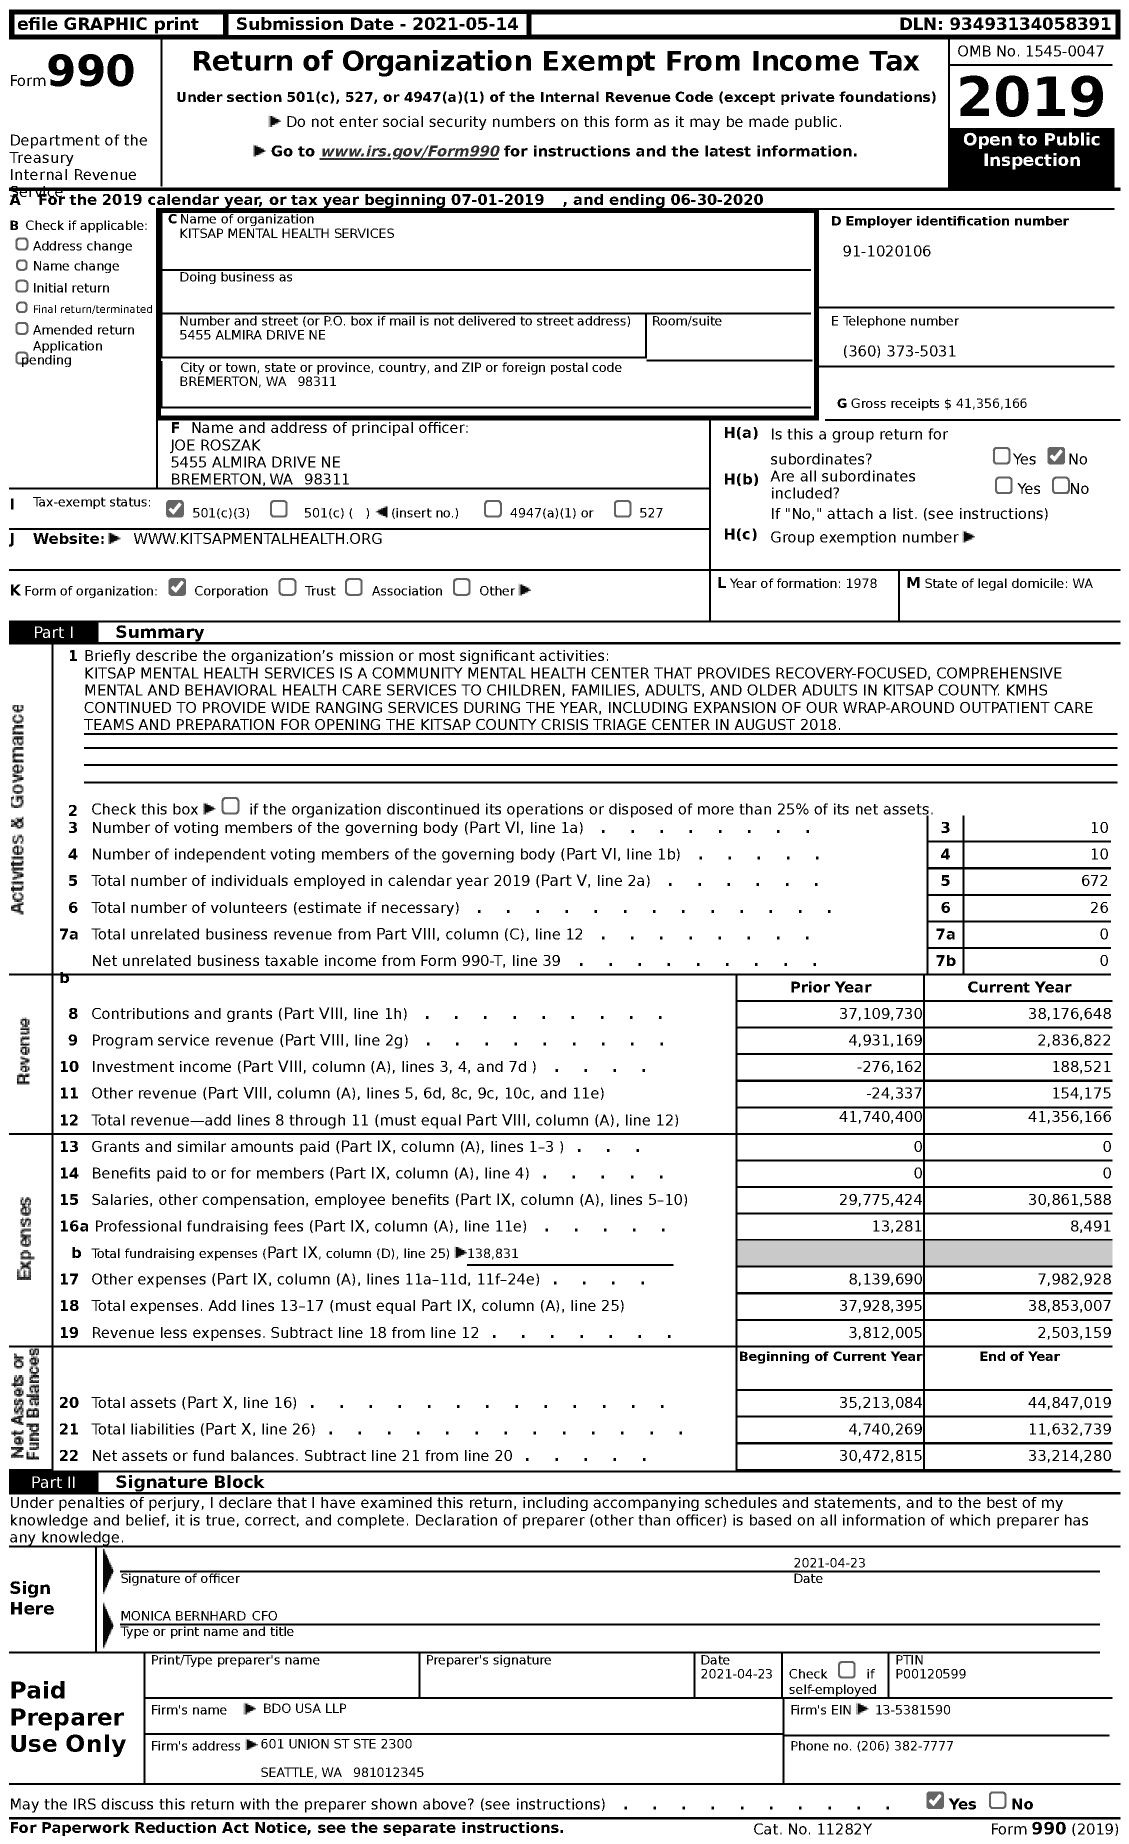 Image of first page of 2019 Form 990 for Kitsap Mental Health Services (KMHS)